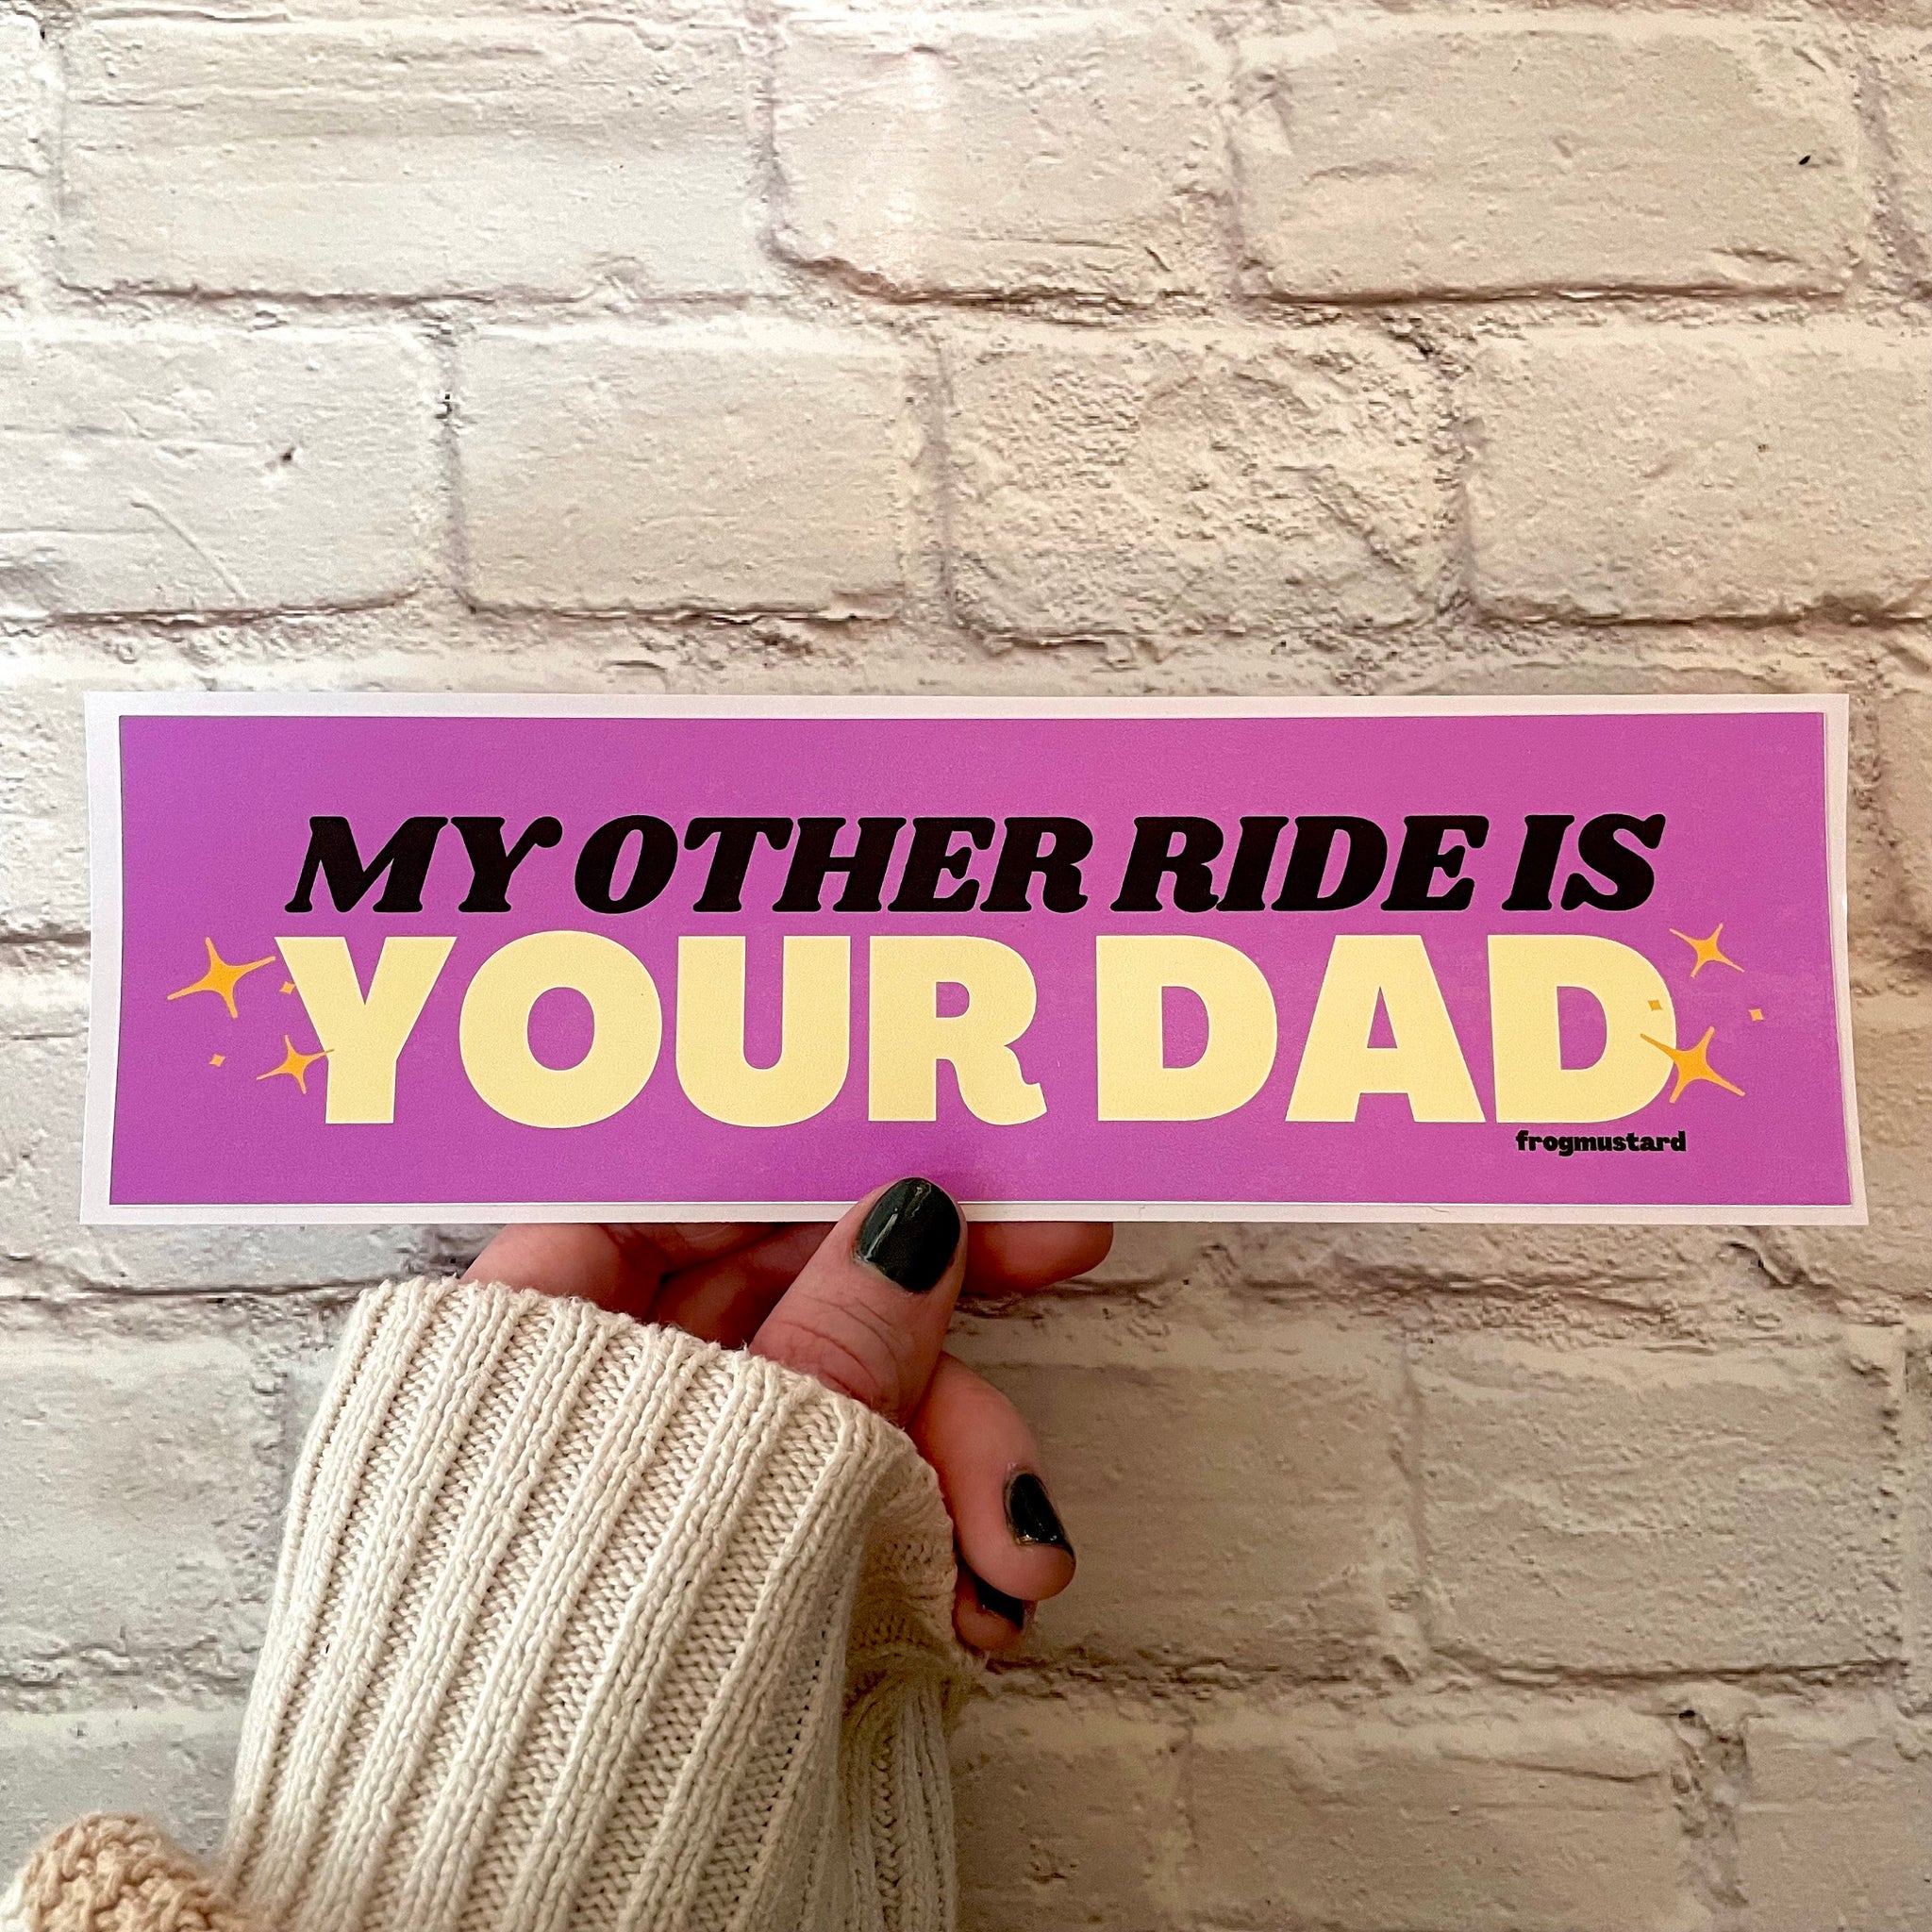 My other ride is your dad | 8.5" x 2.5" | Gen Z Humor | Bumper Sticker OR Magnet